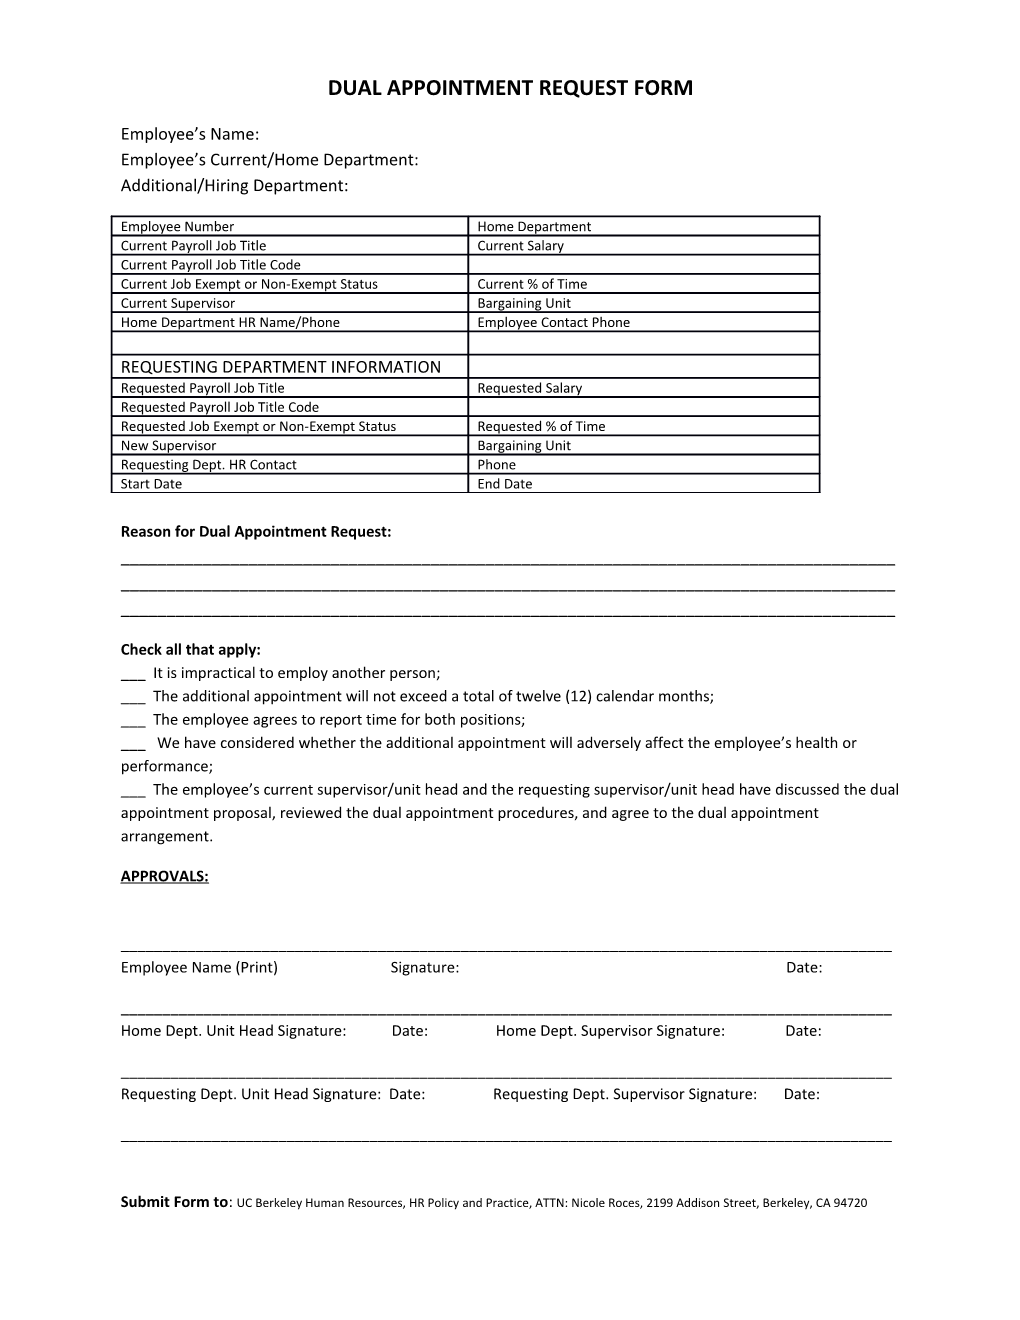 Dual Appointment Request Form